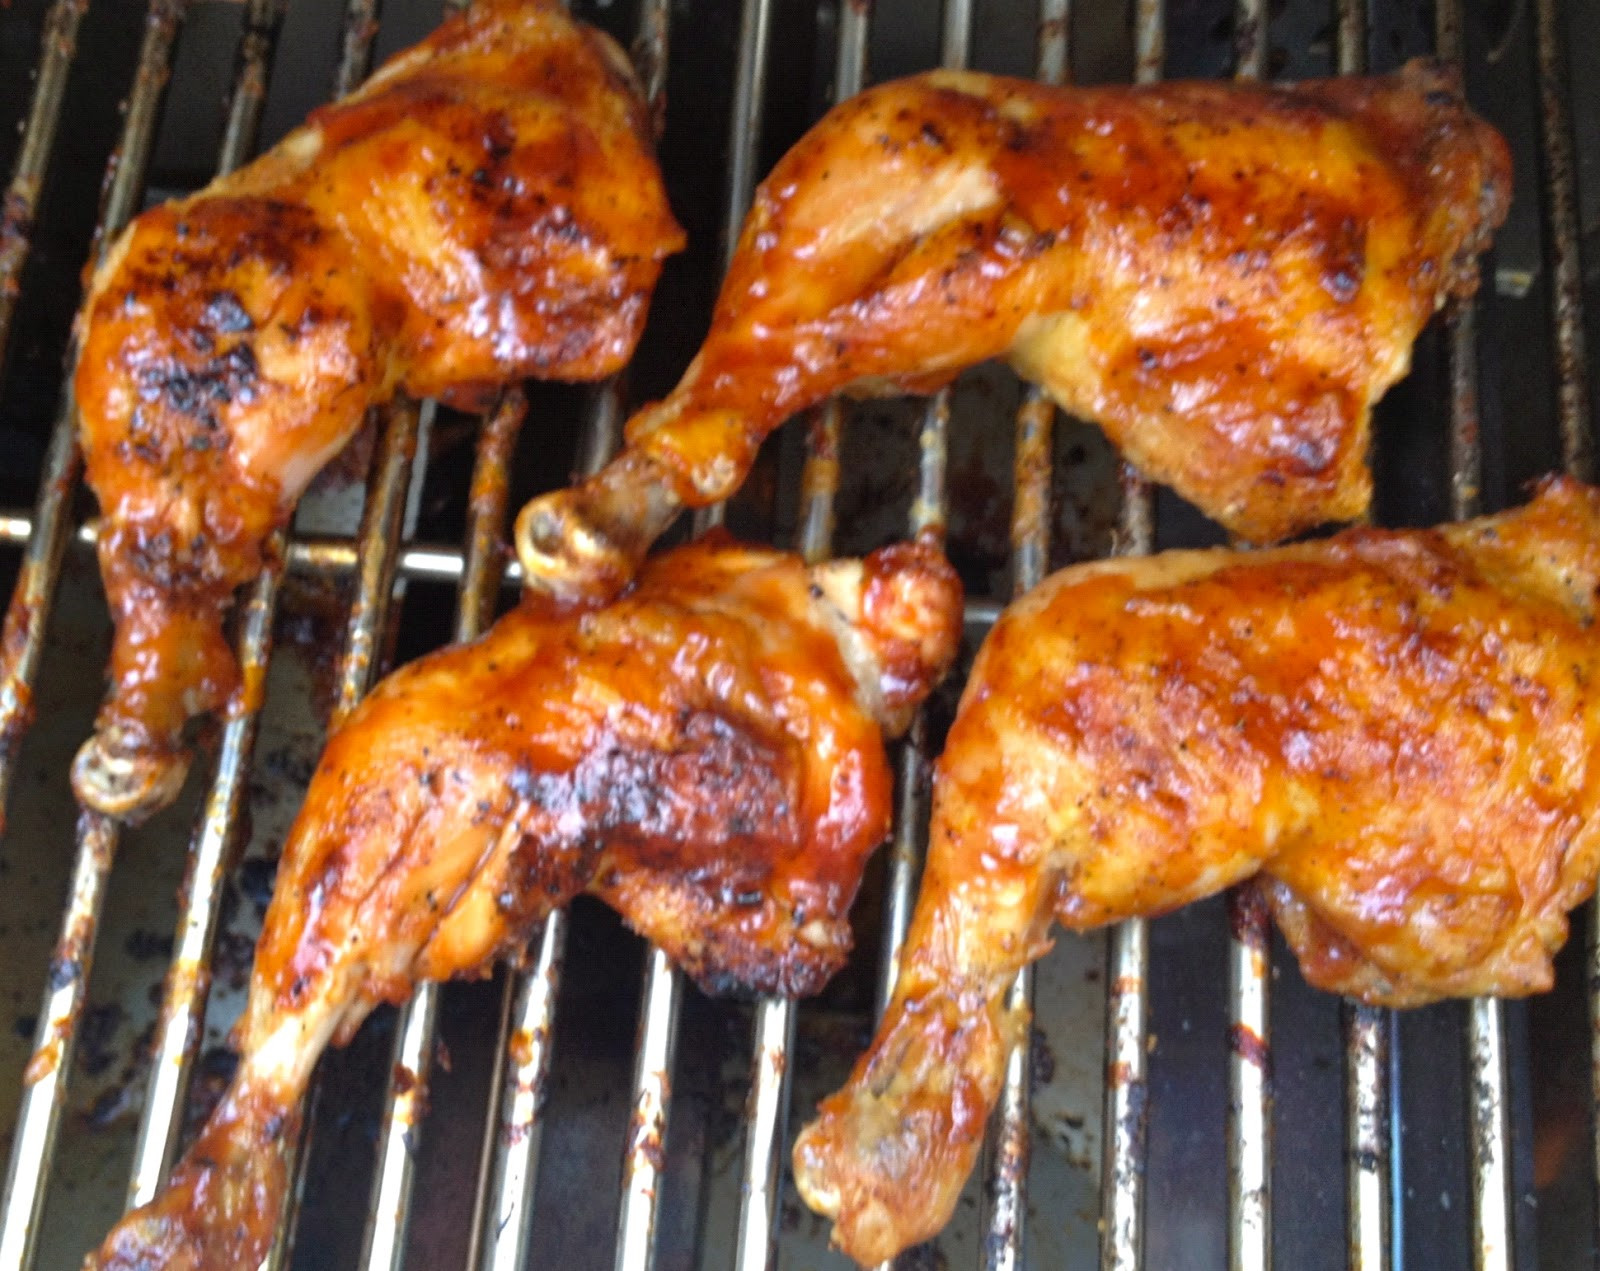 Bbq Chicken Legs On Grill
 BBQ Chicken Legs A Southern Soul